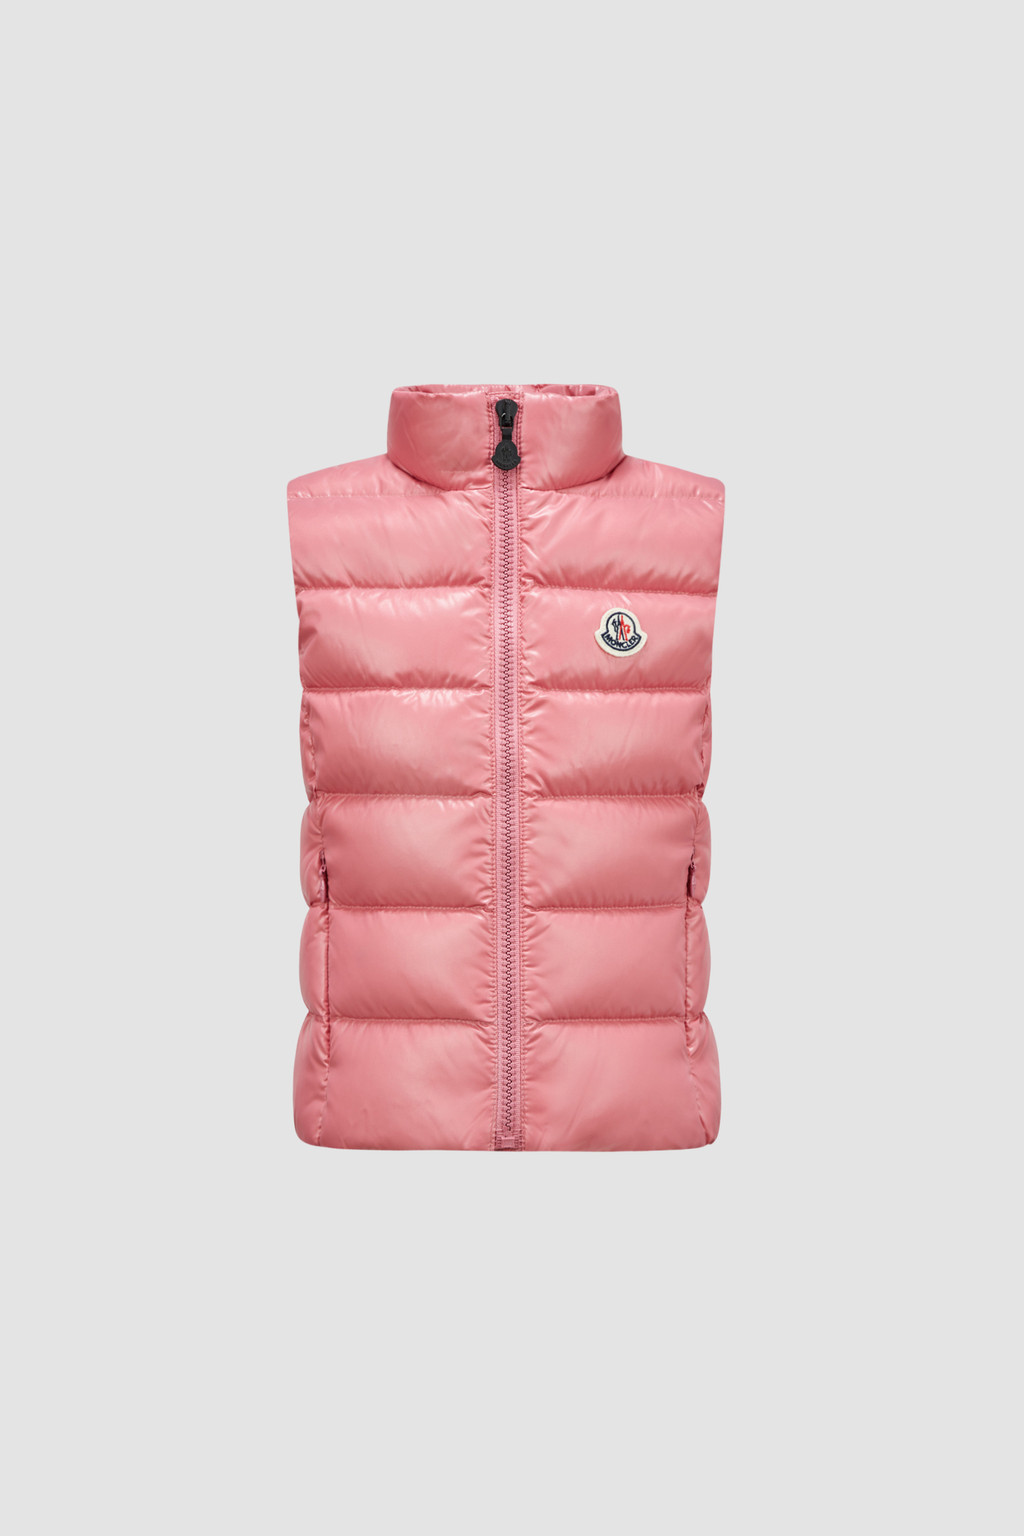 Online Exclusives for Children - New In | Moncler US